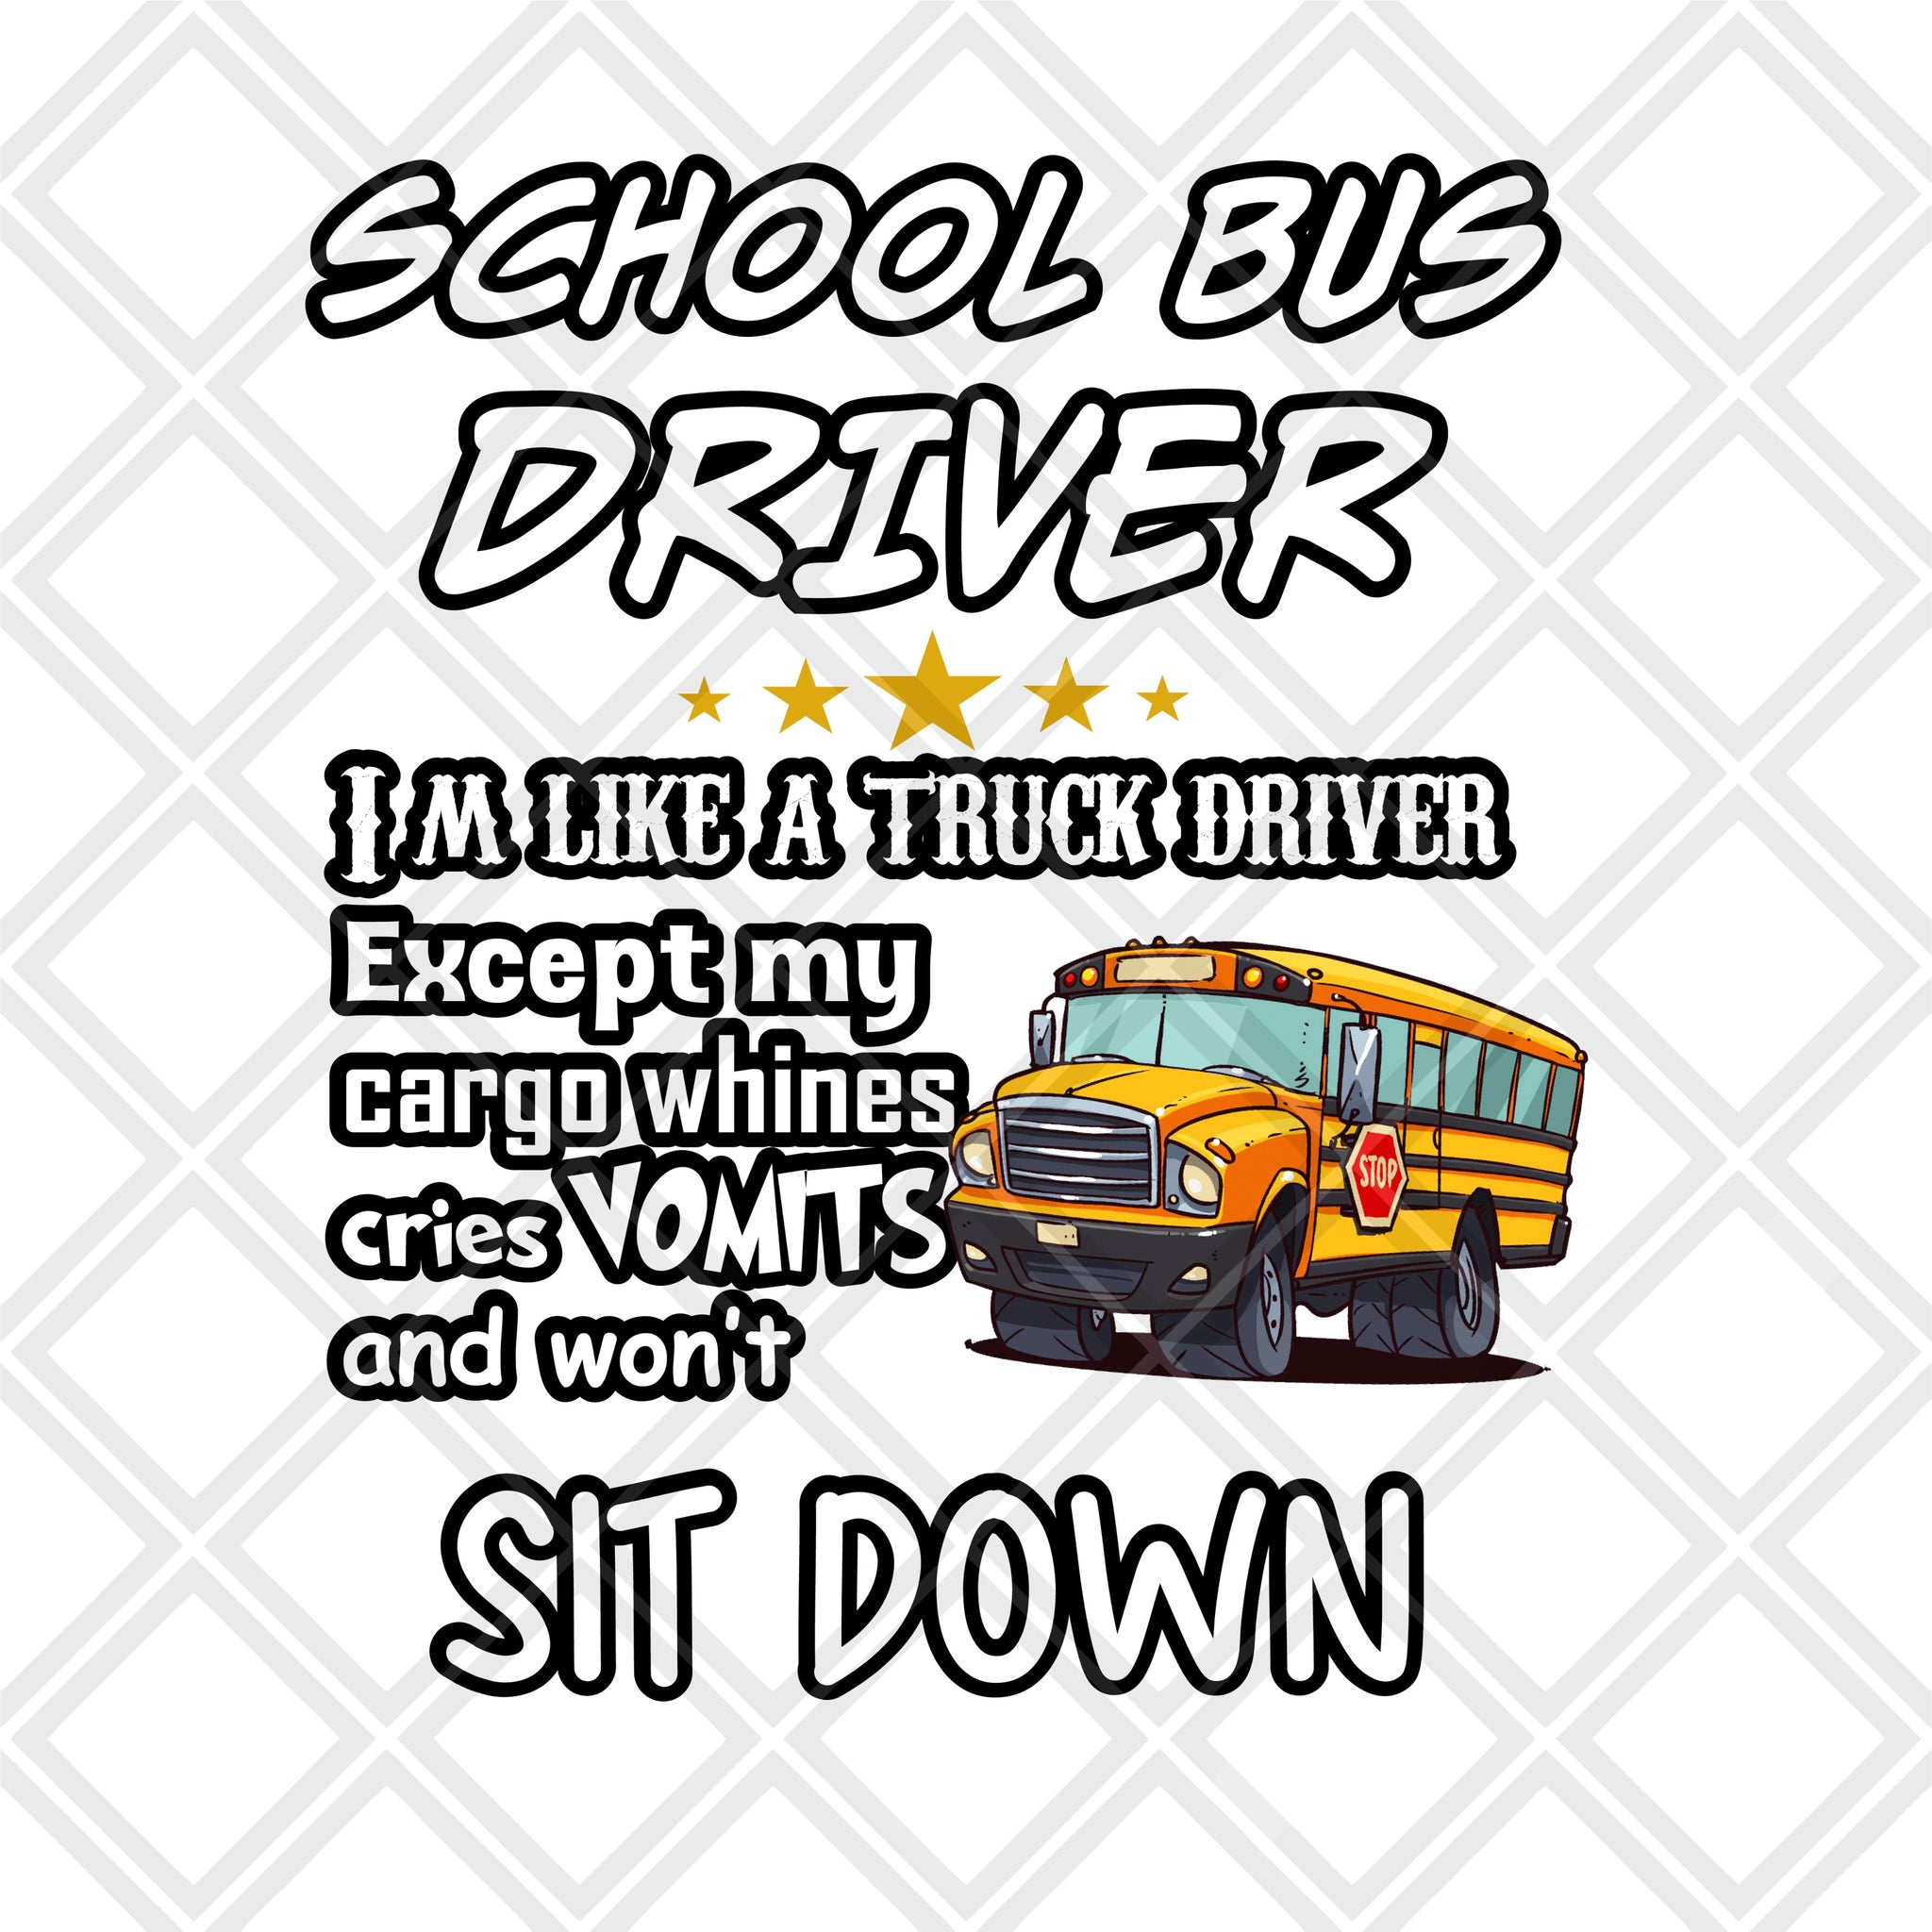 School Bus Driver Im Like A Truck Driver Except My Cargo Whines Htv Tr Popzy Bows